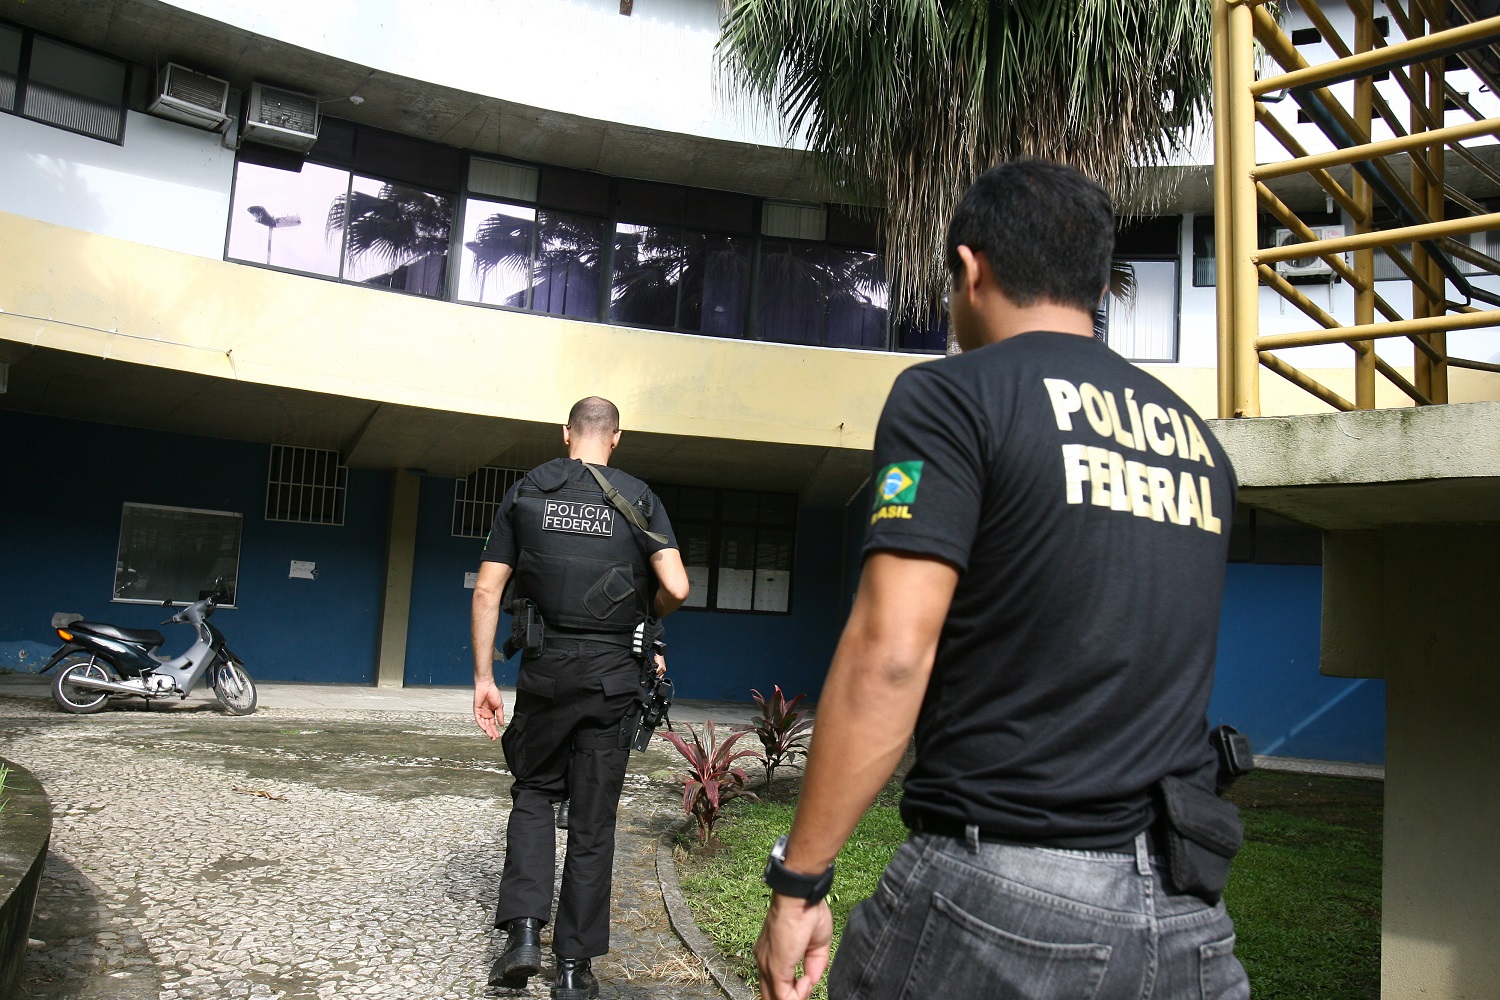 Two Federal Police officers in Brazil approach a building.